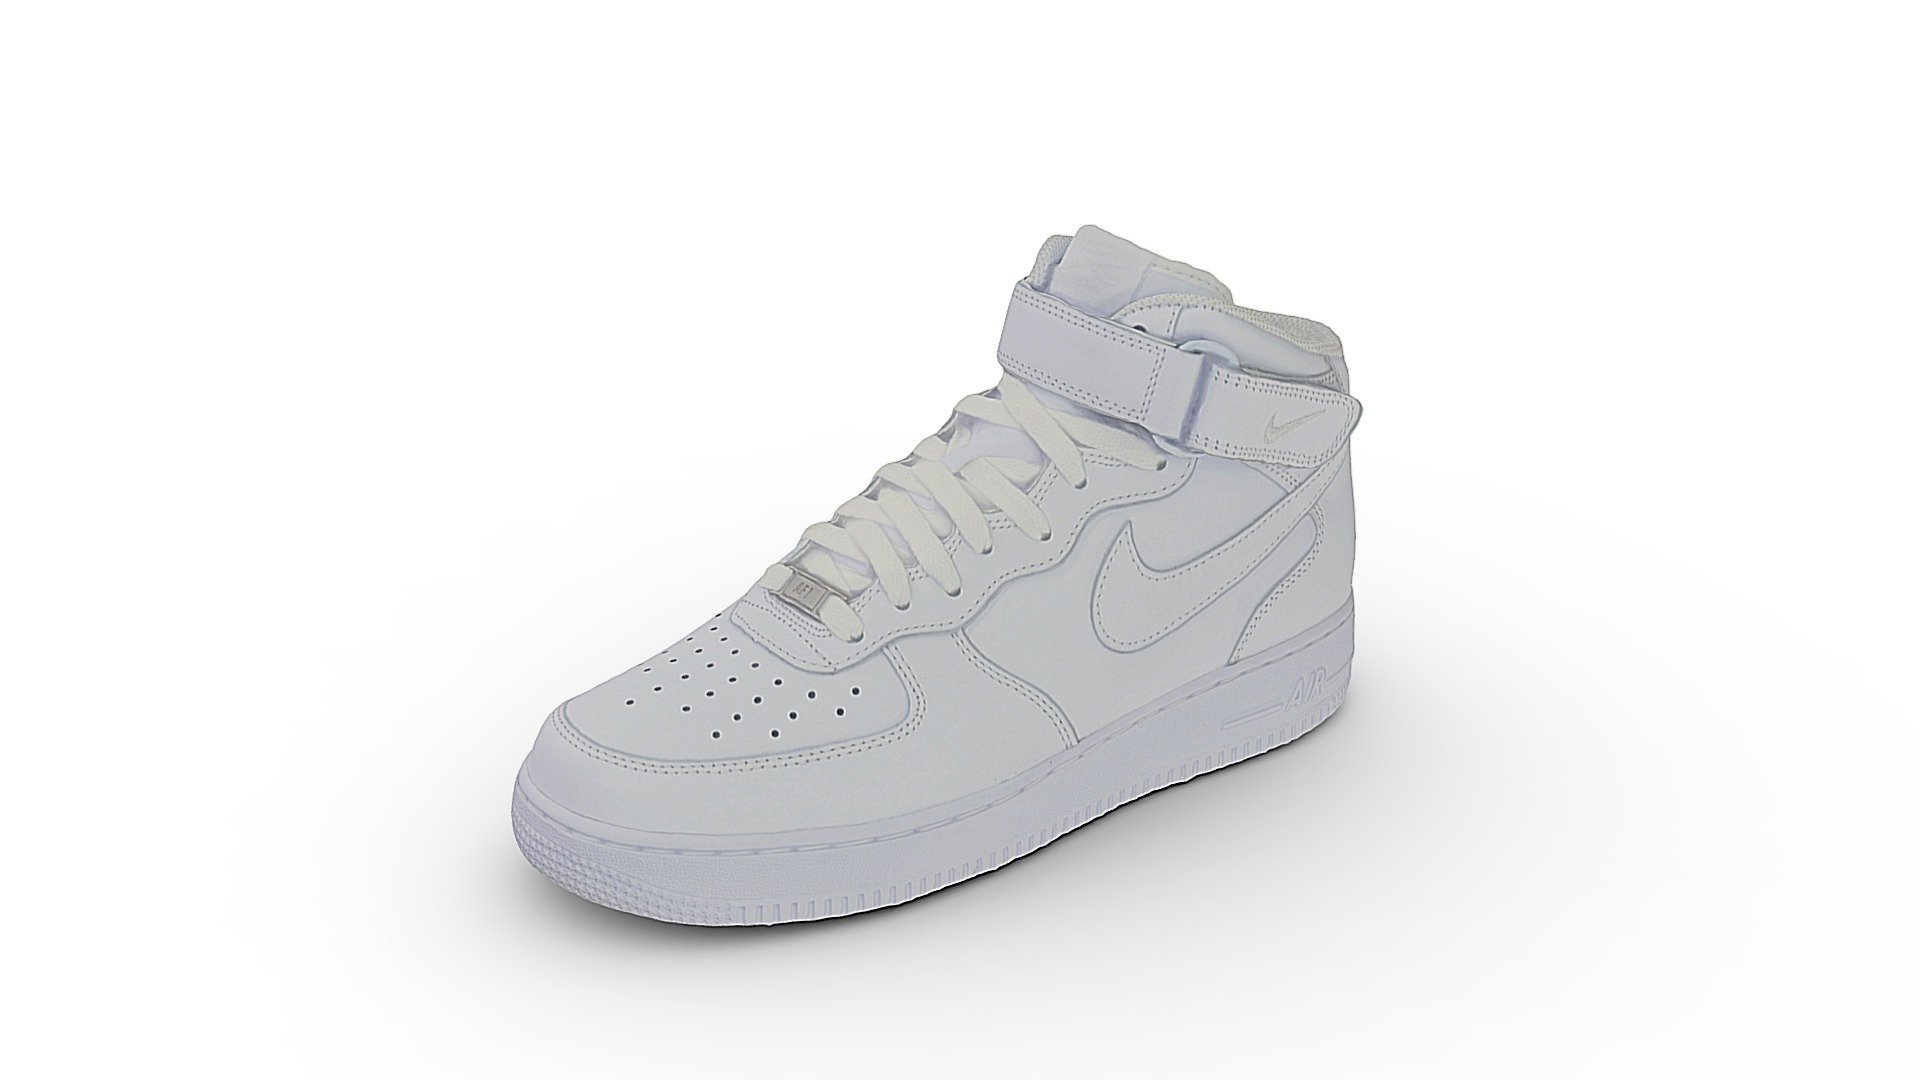 High quality 3D reconstruction using photogrammetry. Find the right shoe here
https://sketchfab.com/3d-models/nike-air-force-1-white-right-shoe-ea54bbfea6d74a40adf338526eb3eb7d
ready to use for virtual try on 3d model